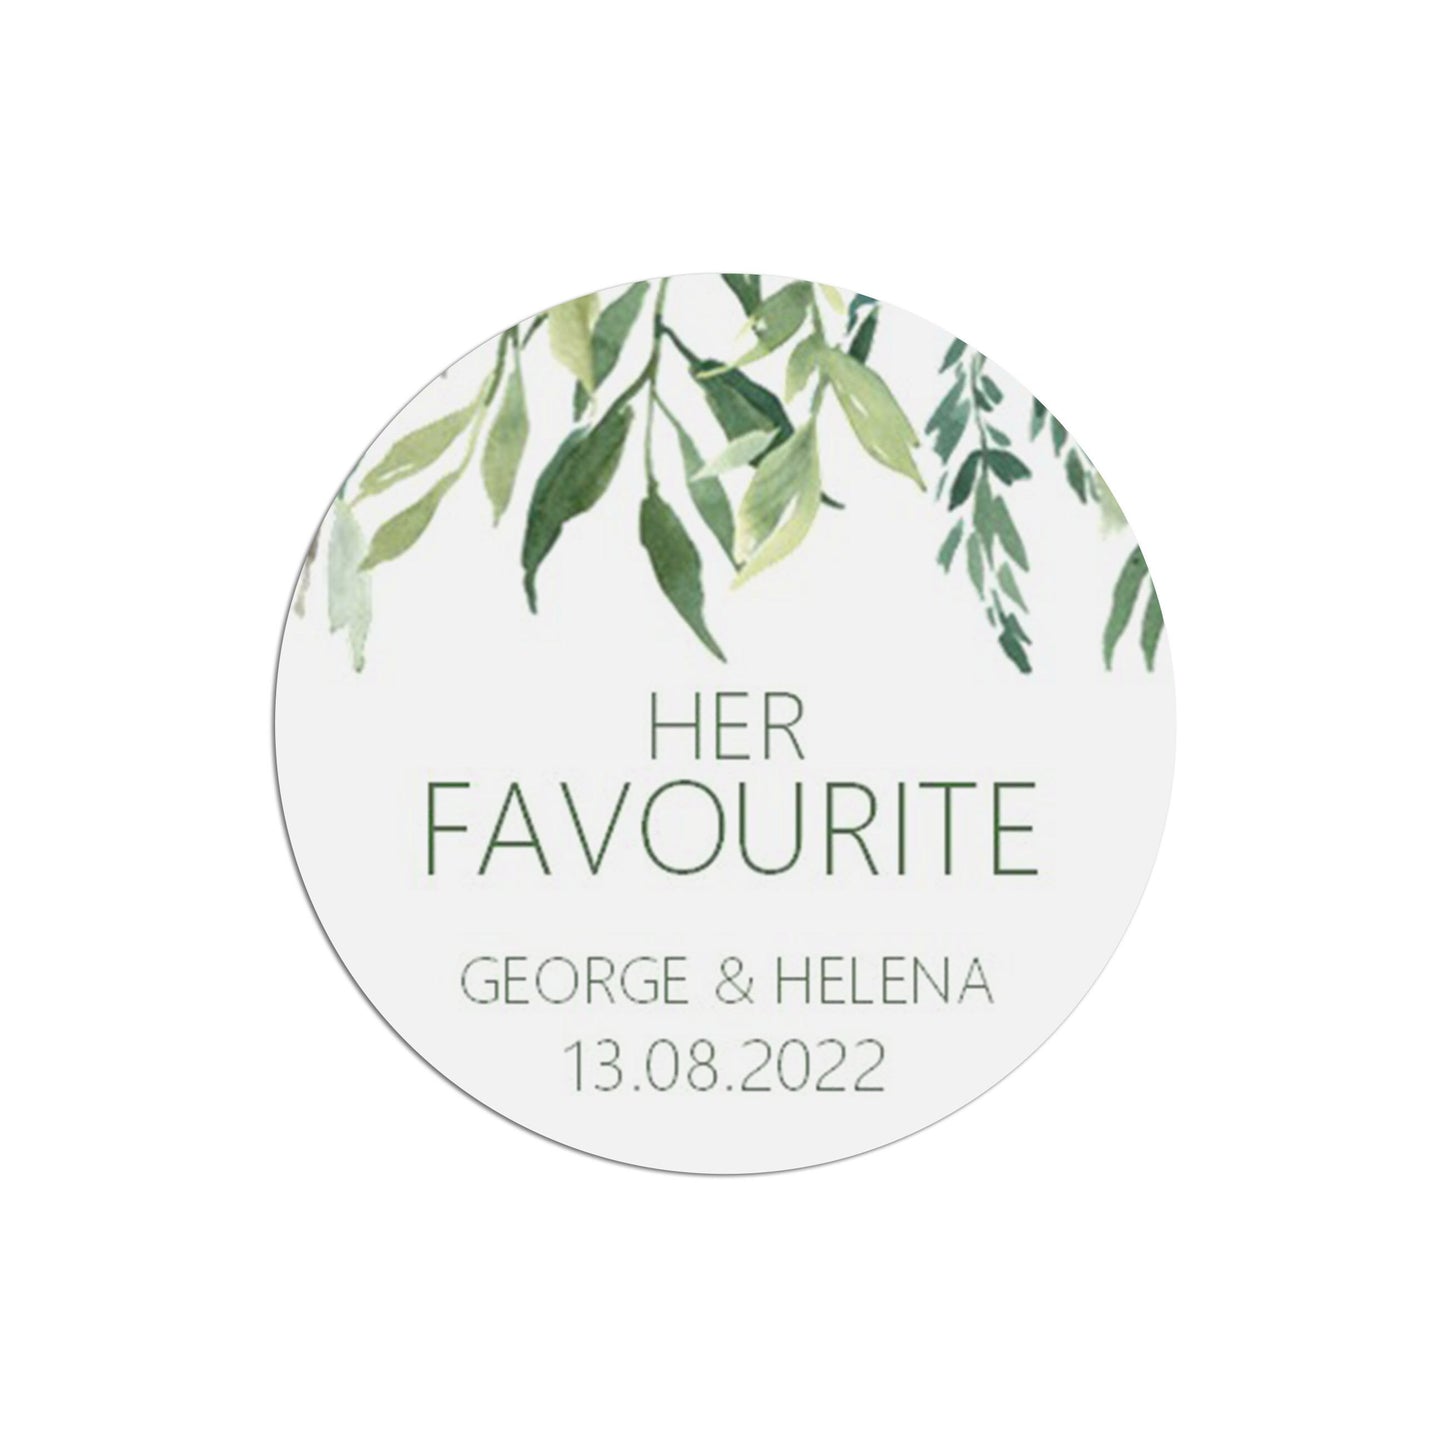 Her Favourite Wedding Stickers, Greenery 37mm Round With Personalisation At The Bottom x 35 Stickers Per Sheet